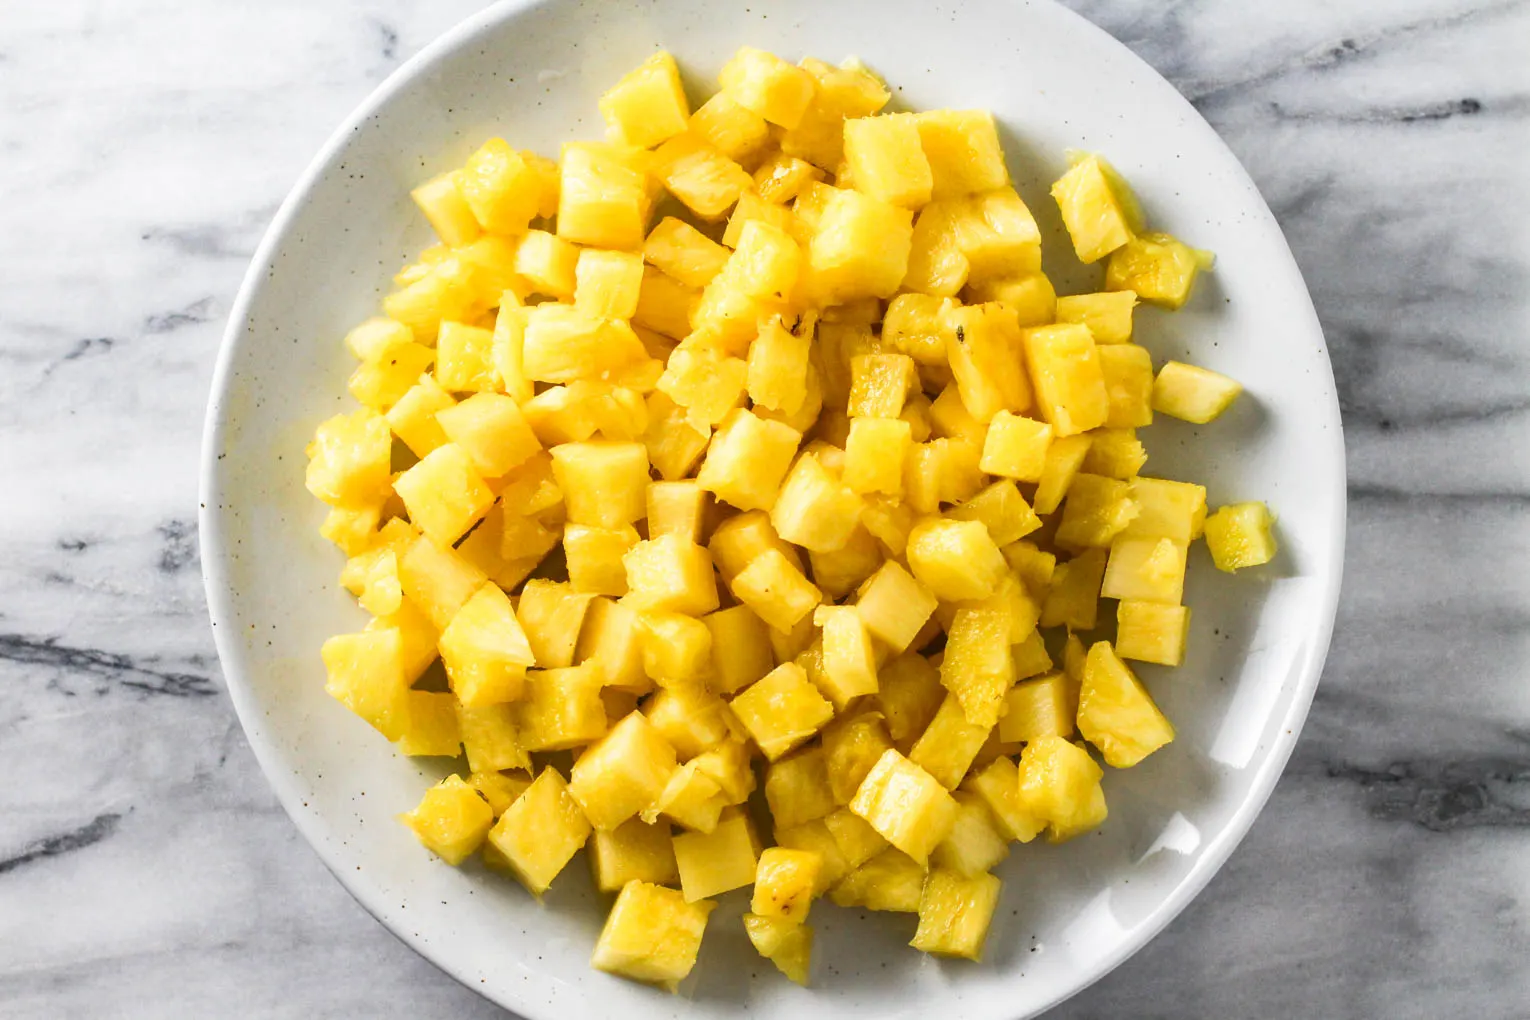 Overhead shot of diced pineapple on a plate standing on marble background.